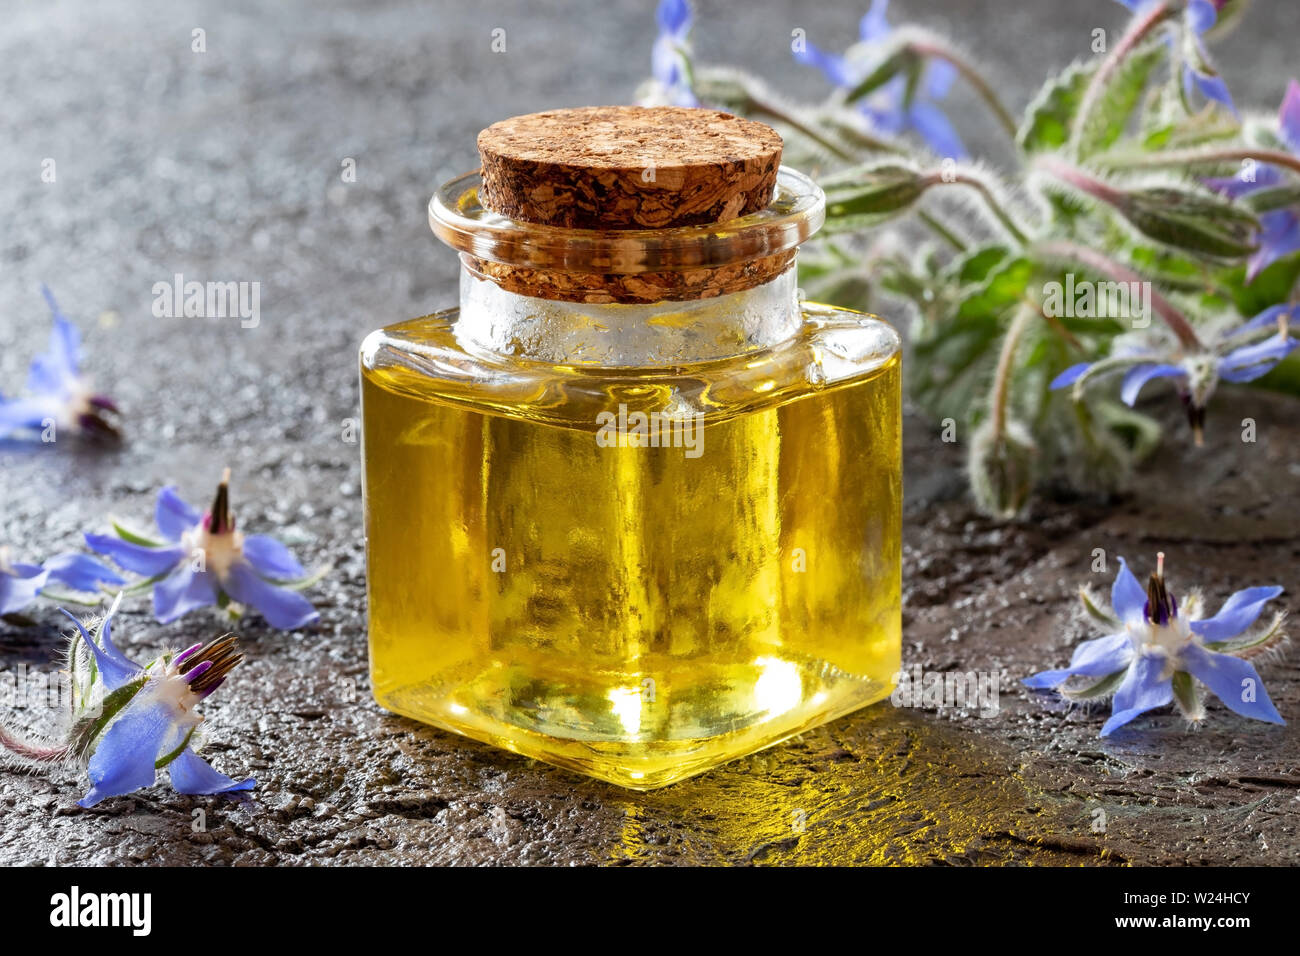 A bottle of borage oil with fresh plant on a dark background Stock Photo